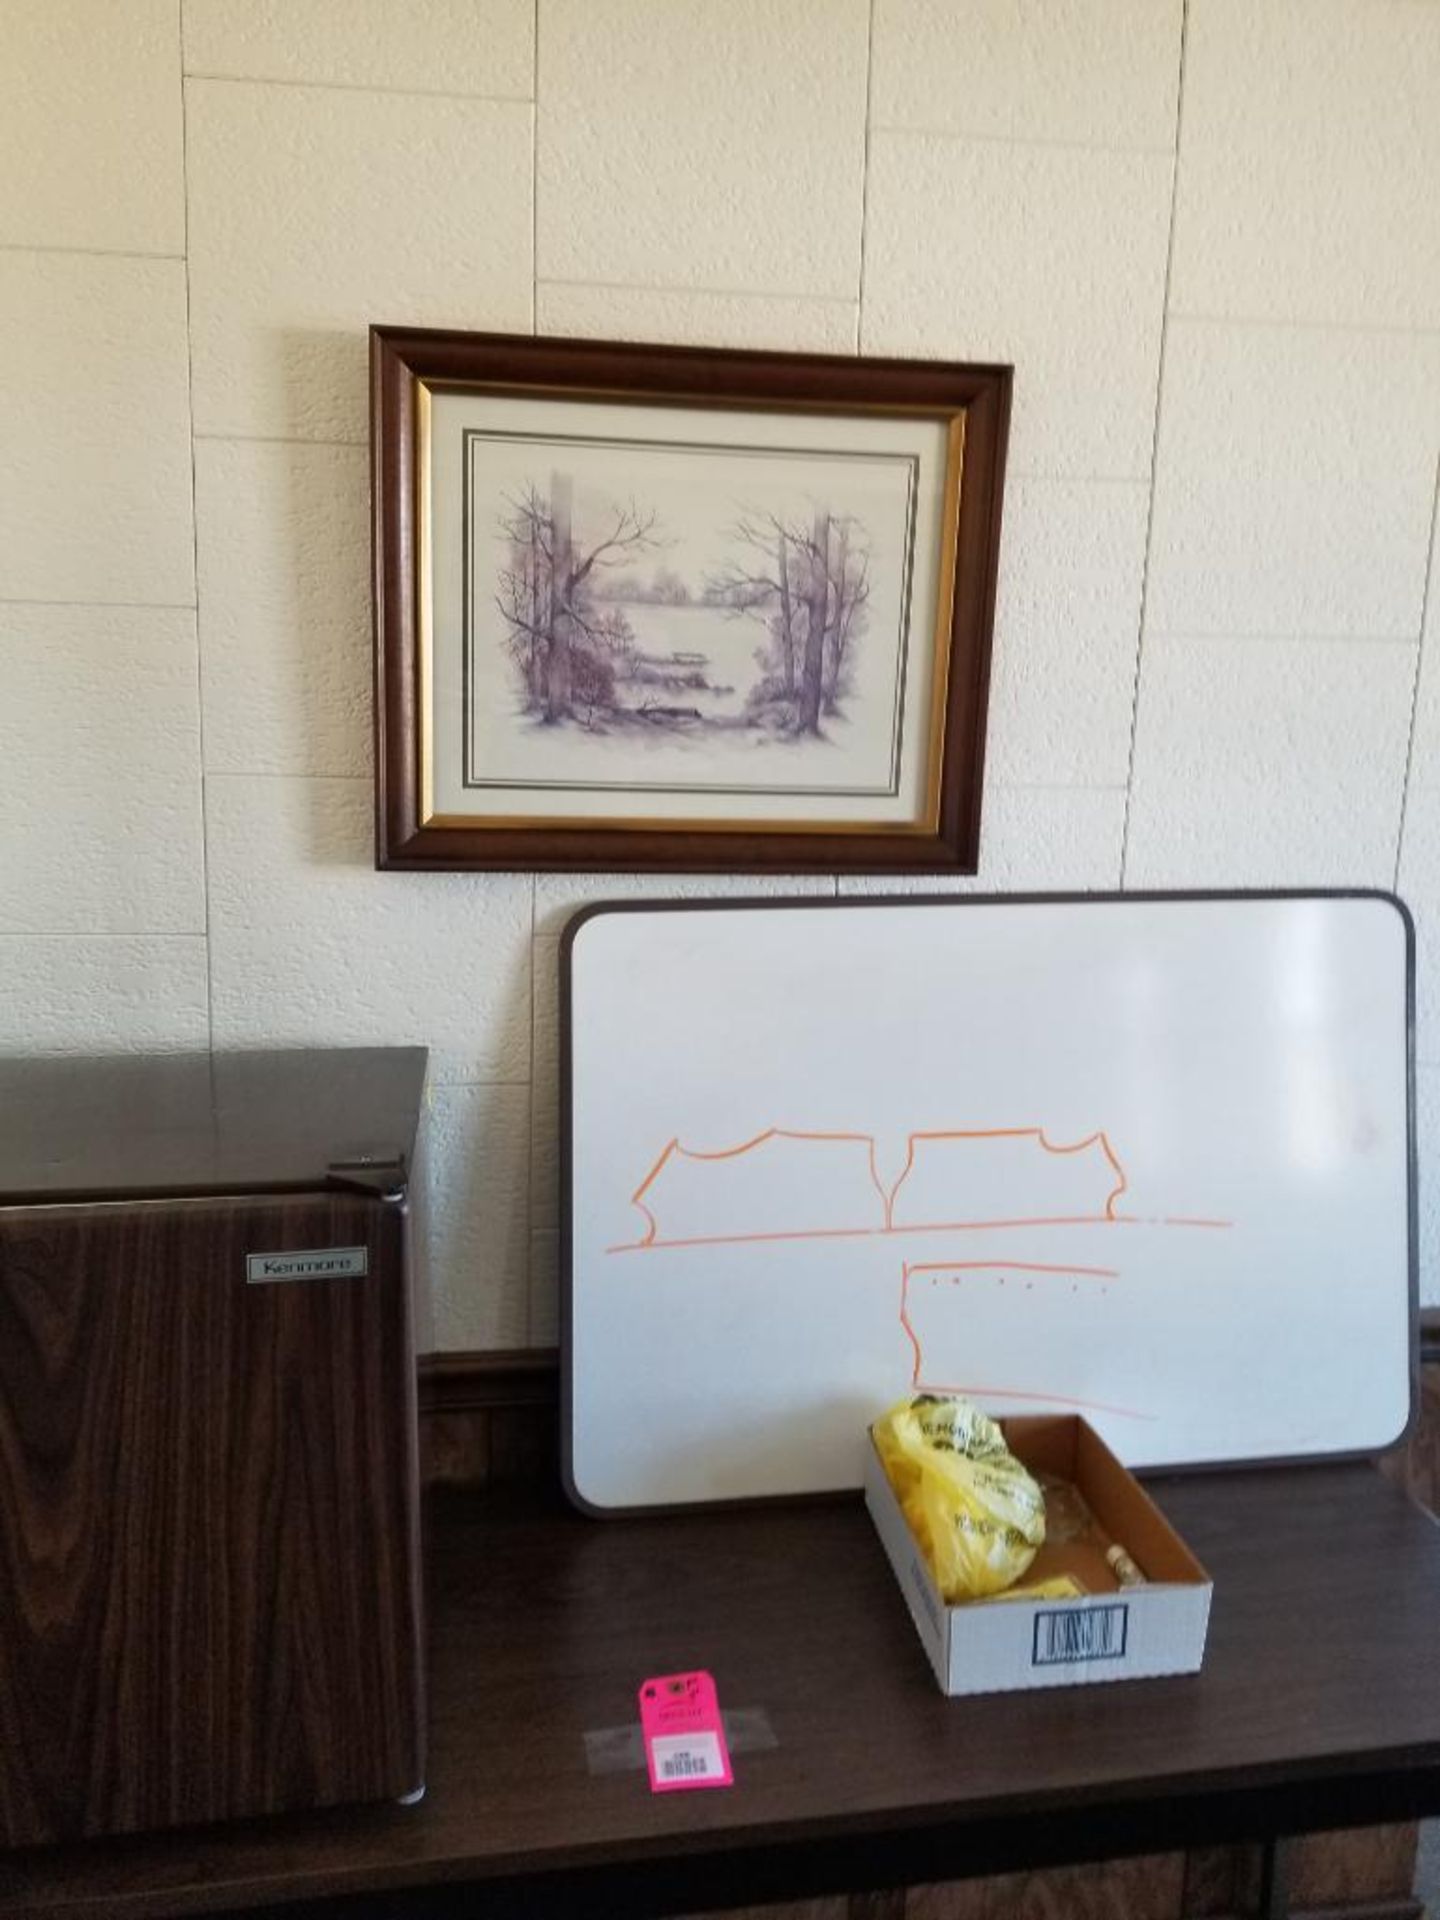 Coat tree, refrigerator, table, and dry erase board. - Image 4 of 5